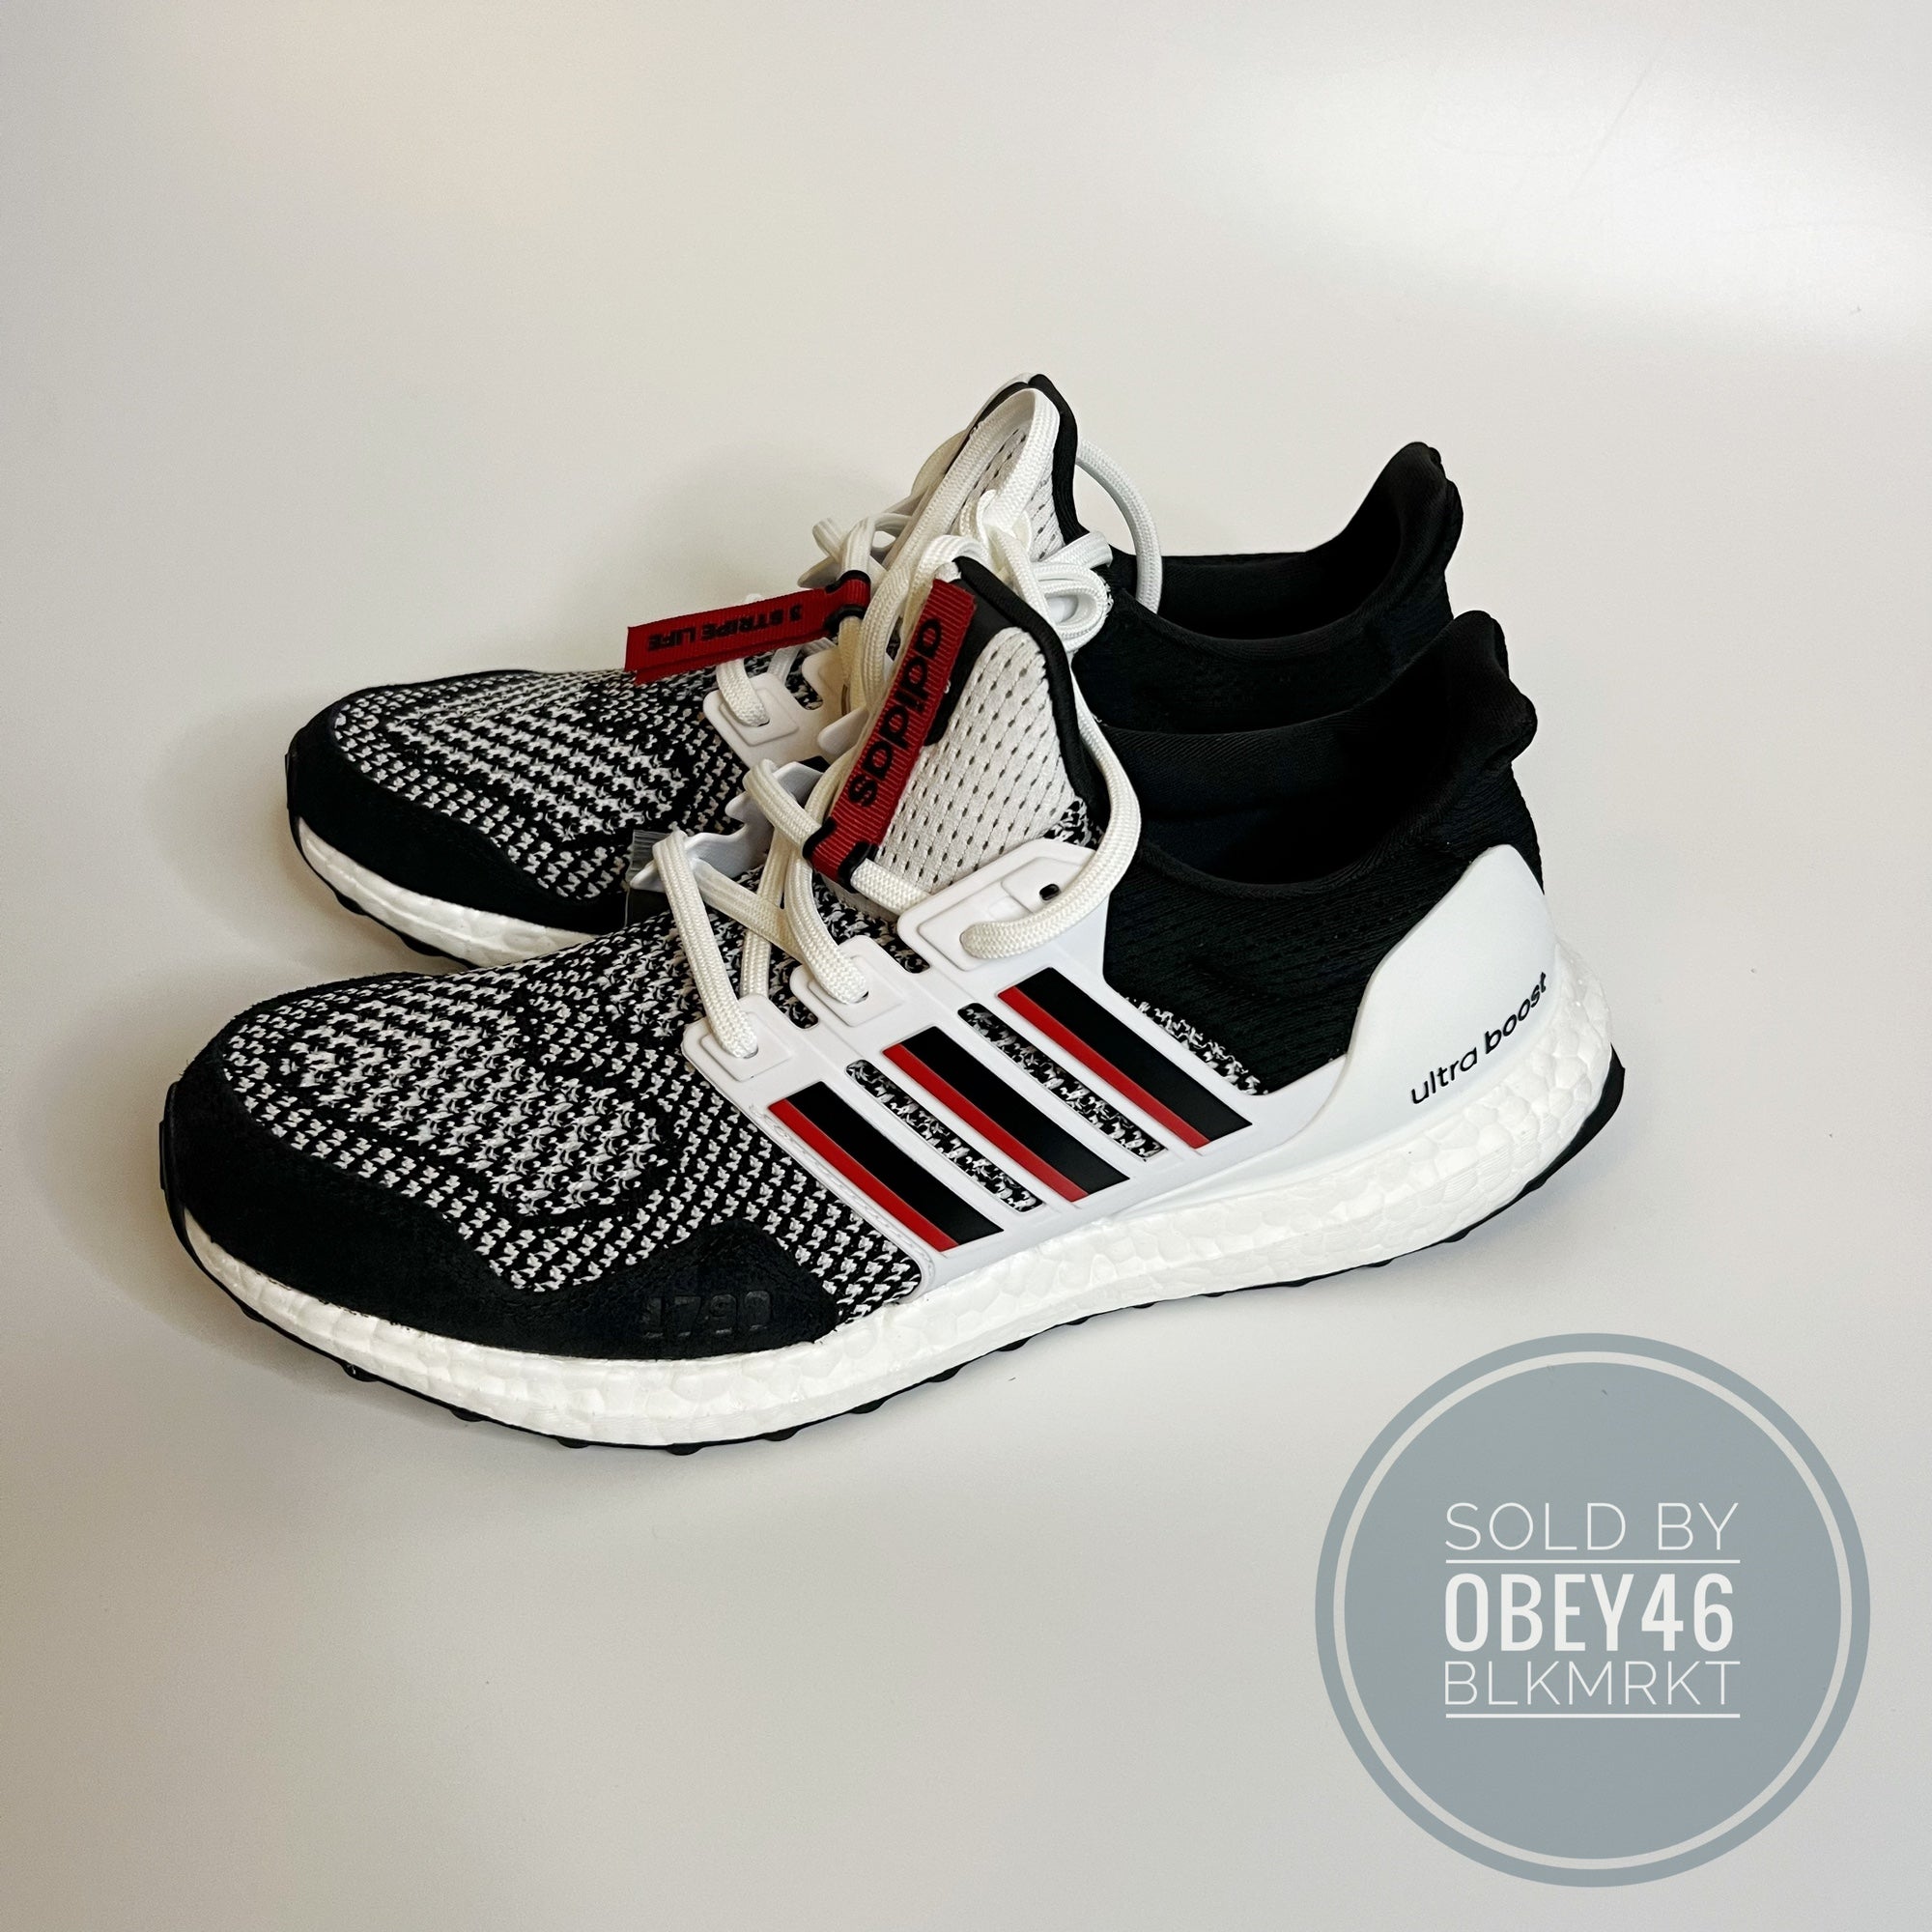 adidas UltraBoost 1.0 x NCAA Louisville Cardinals 2022 for Sale, Authenticity Guaranteed